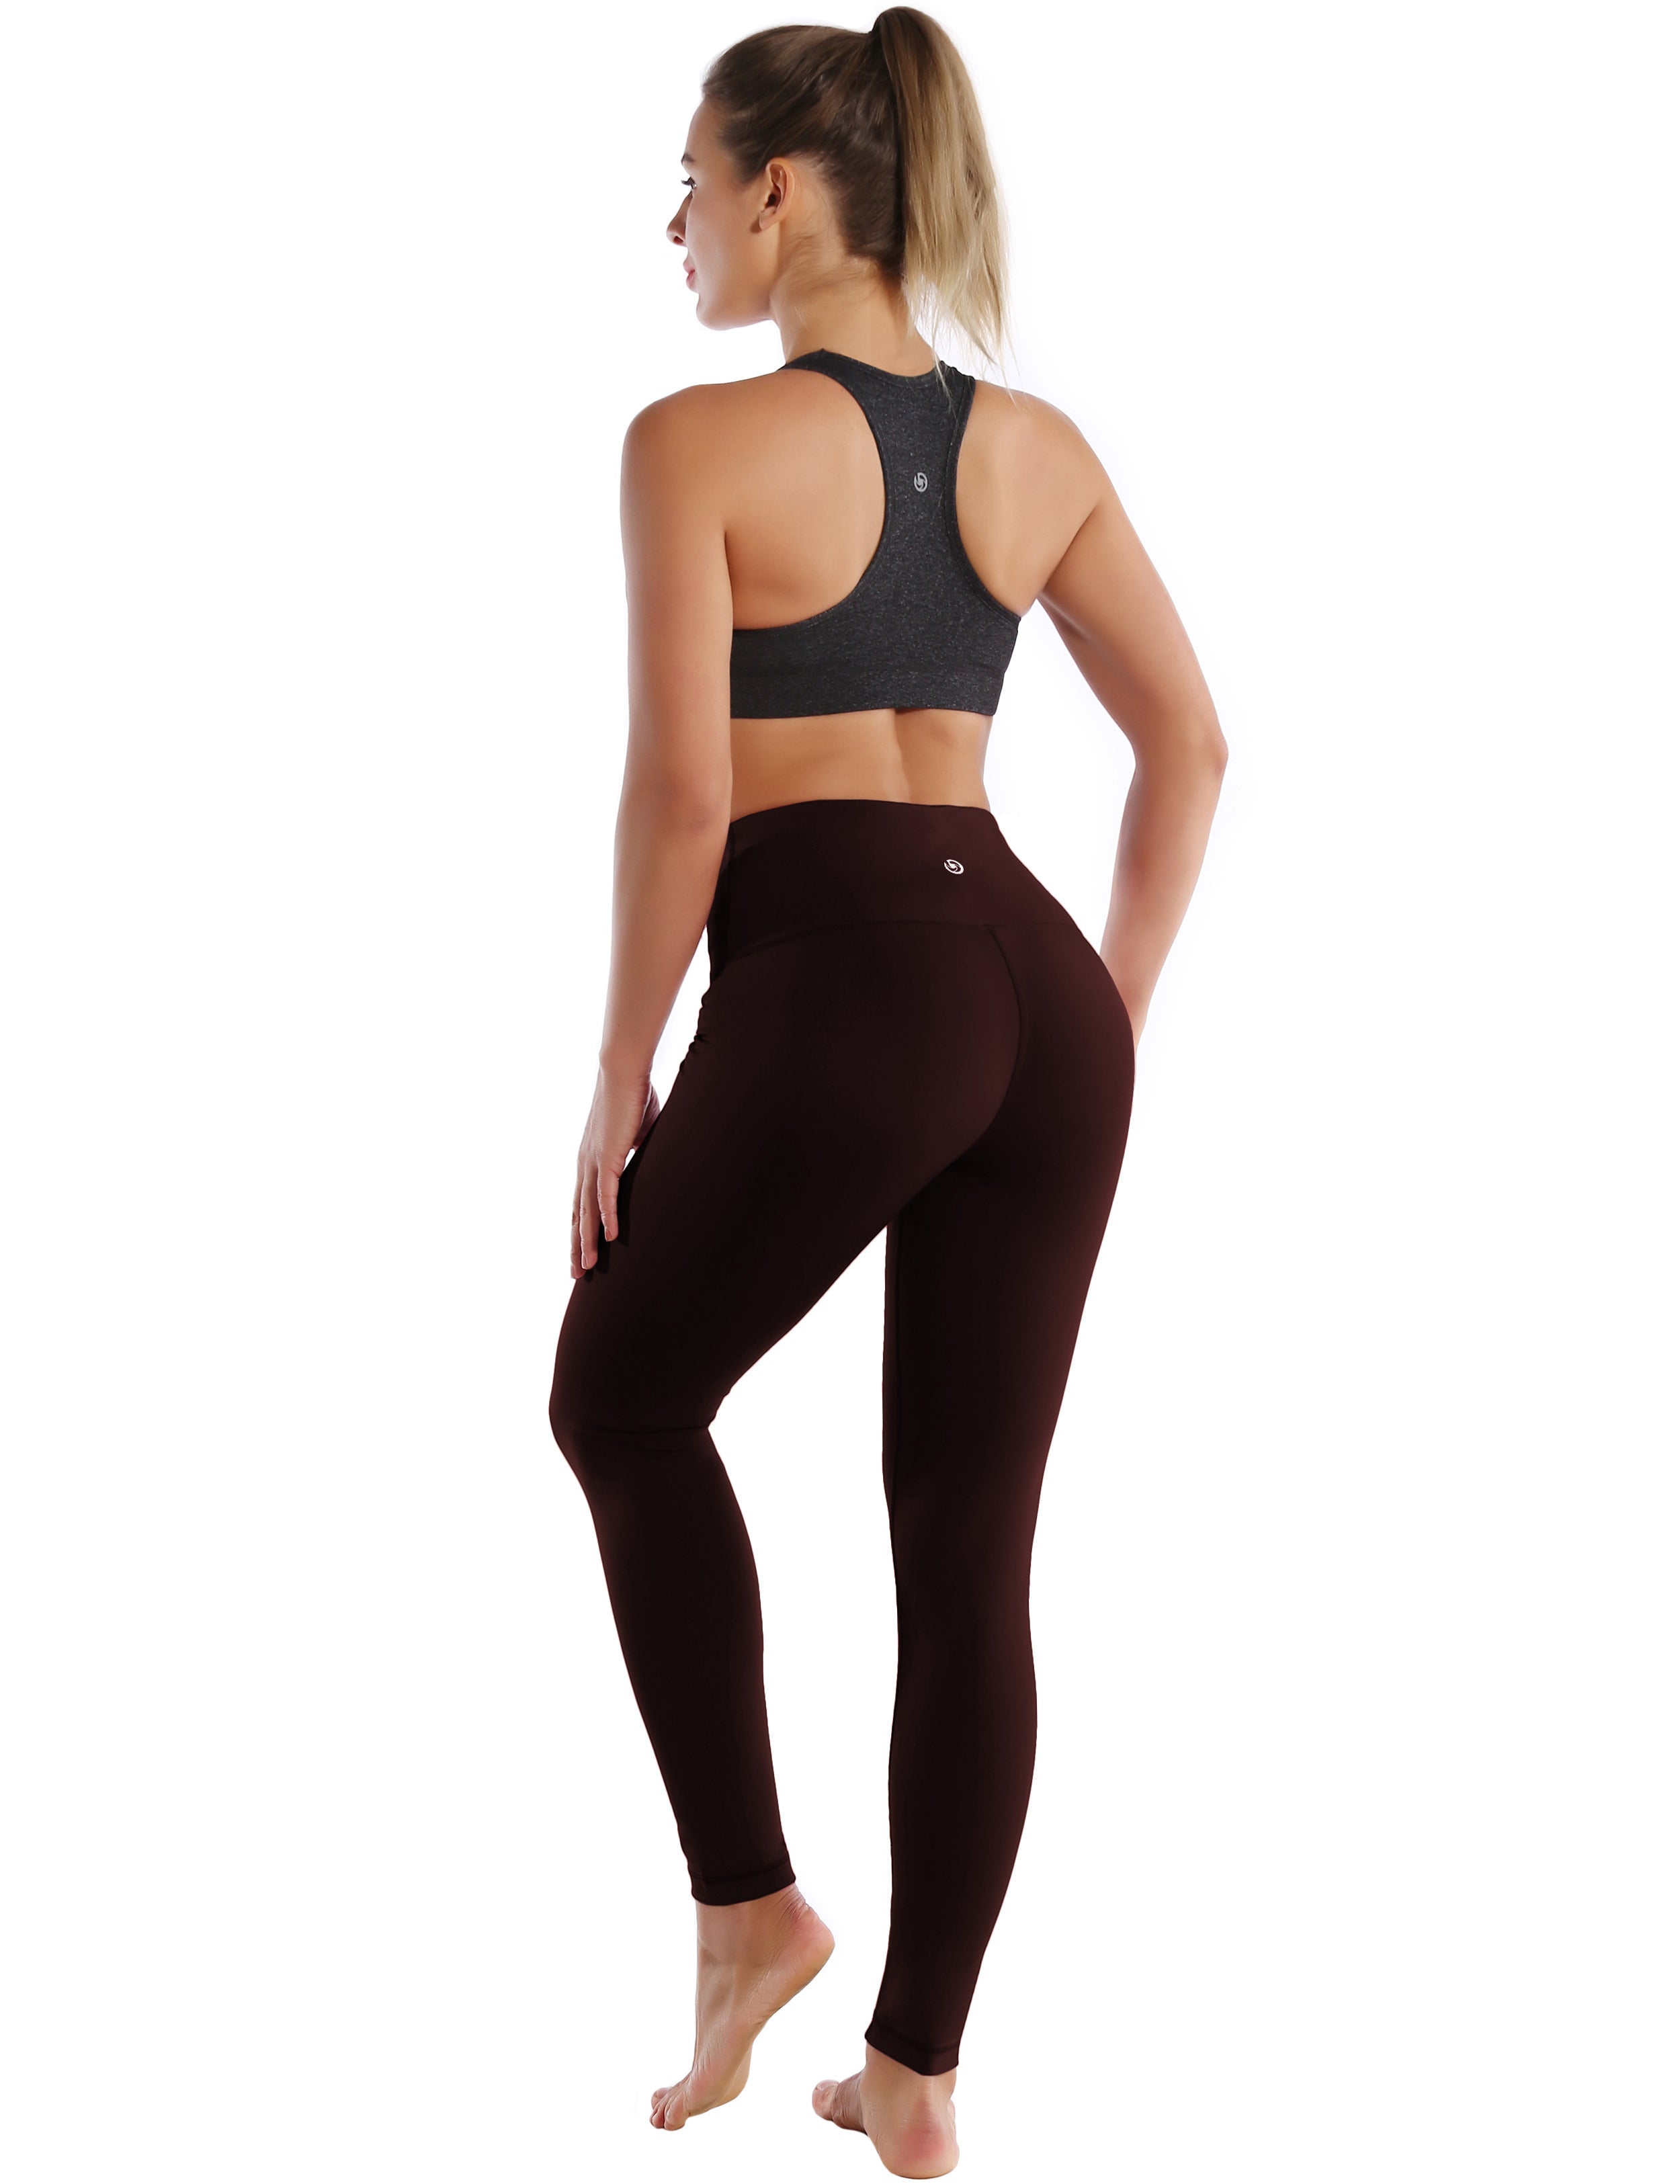 High Waist Yoga Pants mahoganymaroon 75%Nylon/25%Spandex Fabric doesn't attract lint easily 4-way stretch No see-through Moisture-wicking Tummy control Inner pocket Four lengths